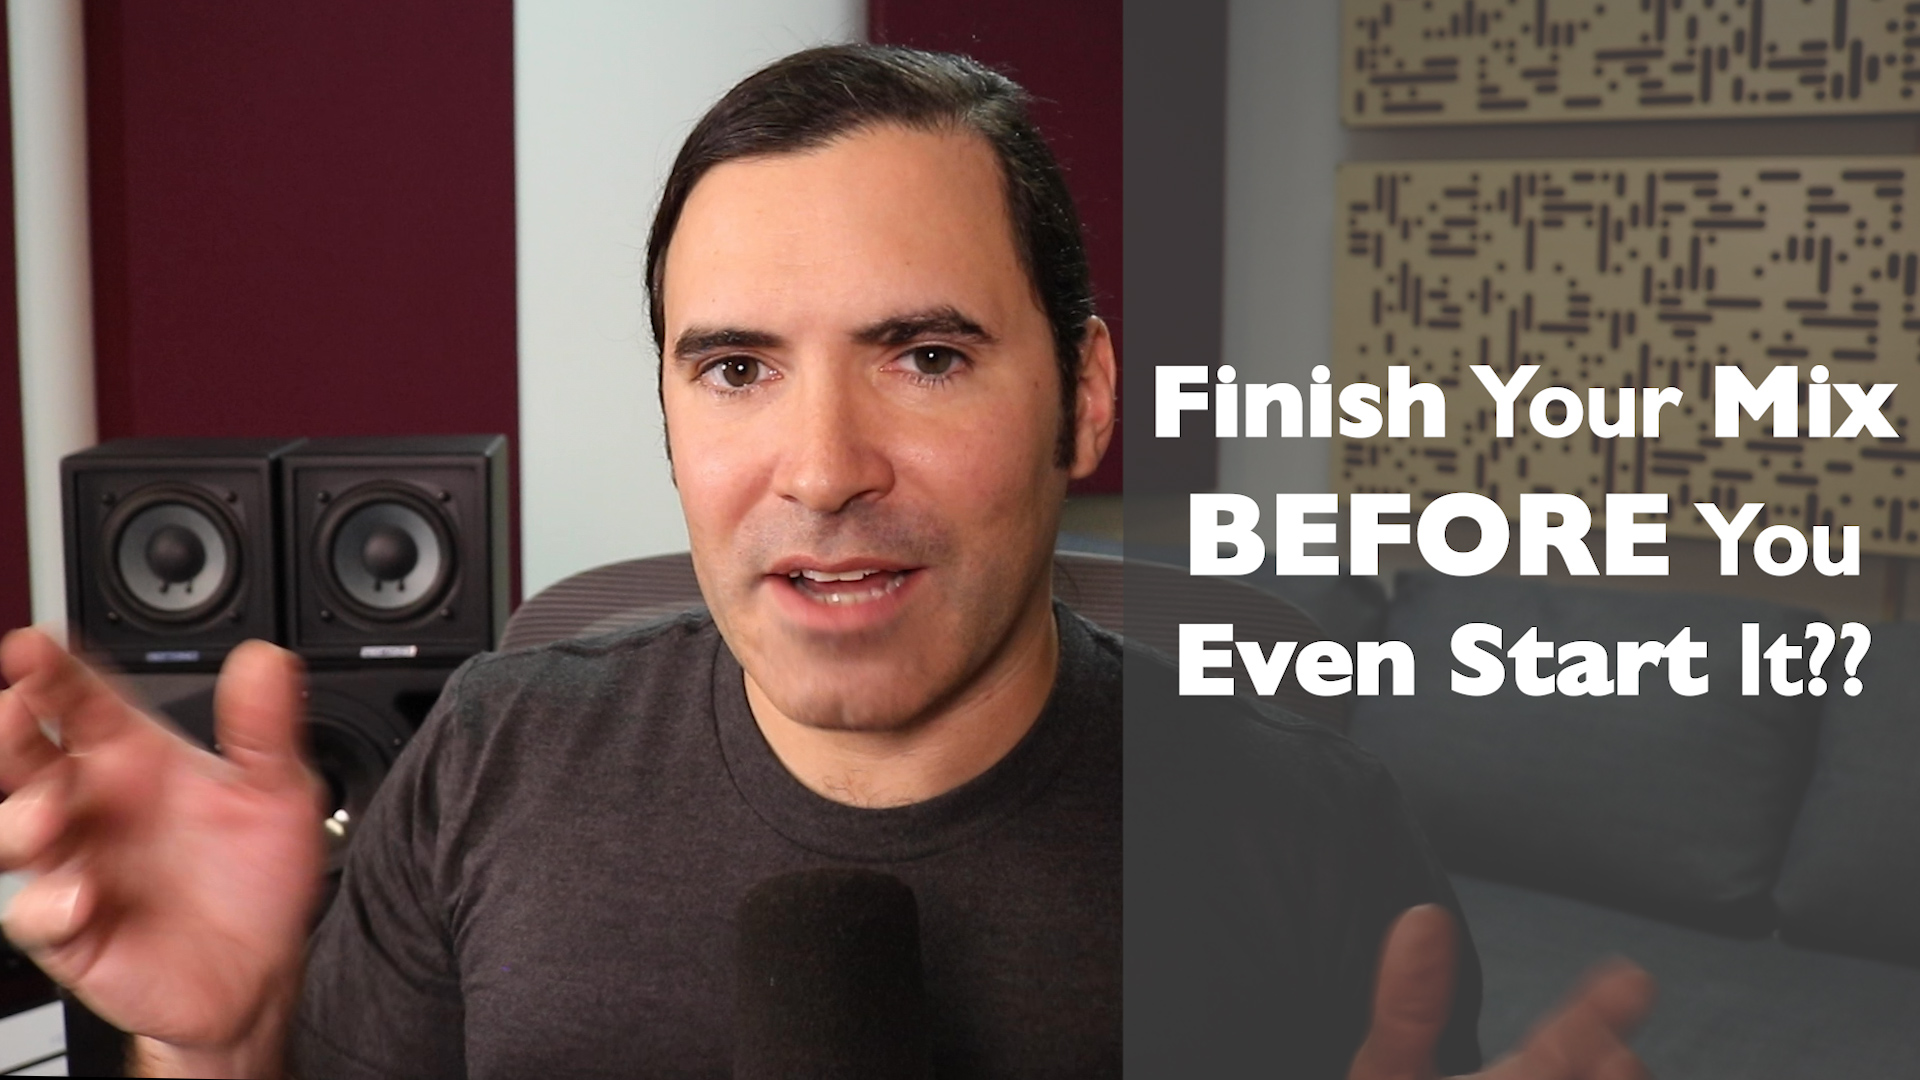 How to Finish Your Mix Before Your Start It